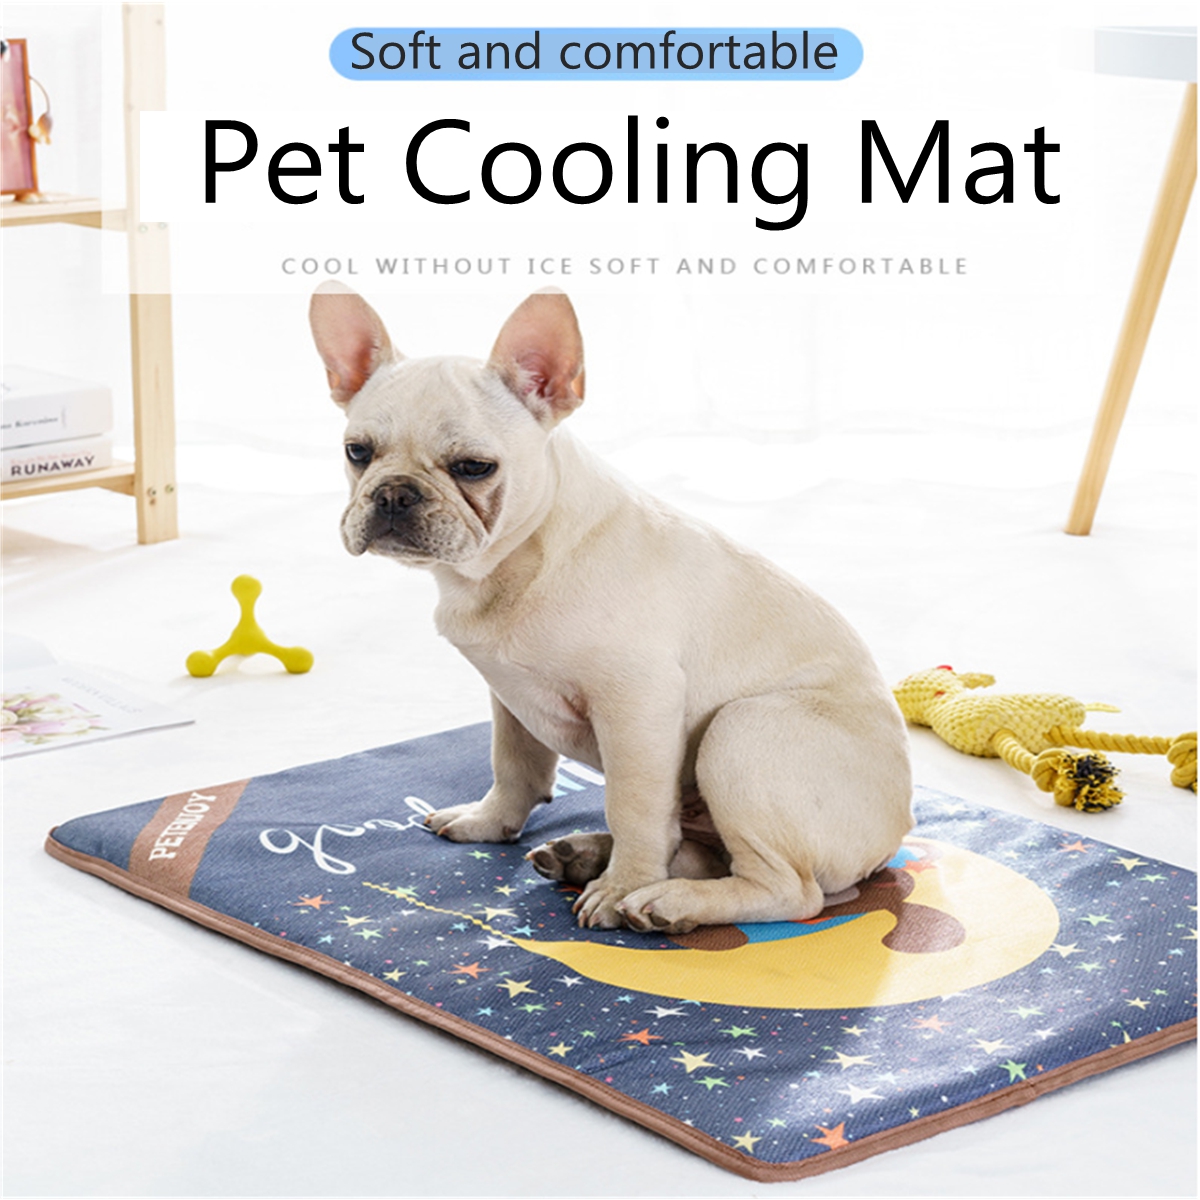 SMLXL-Ice-Silk-Summer-Cooling-Pet-Dog-Cat-Puppy-Cushion-Mat-Pad-Home-1550150-5